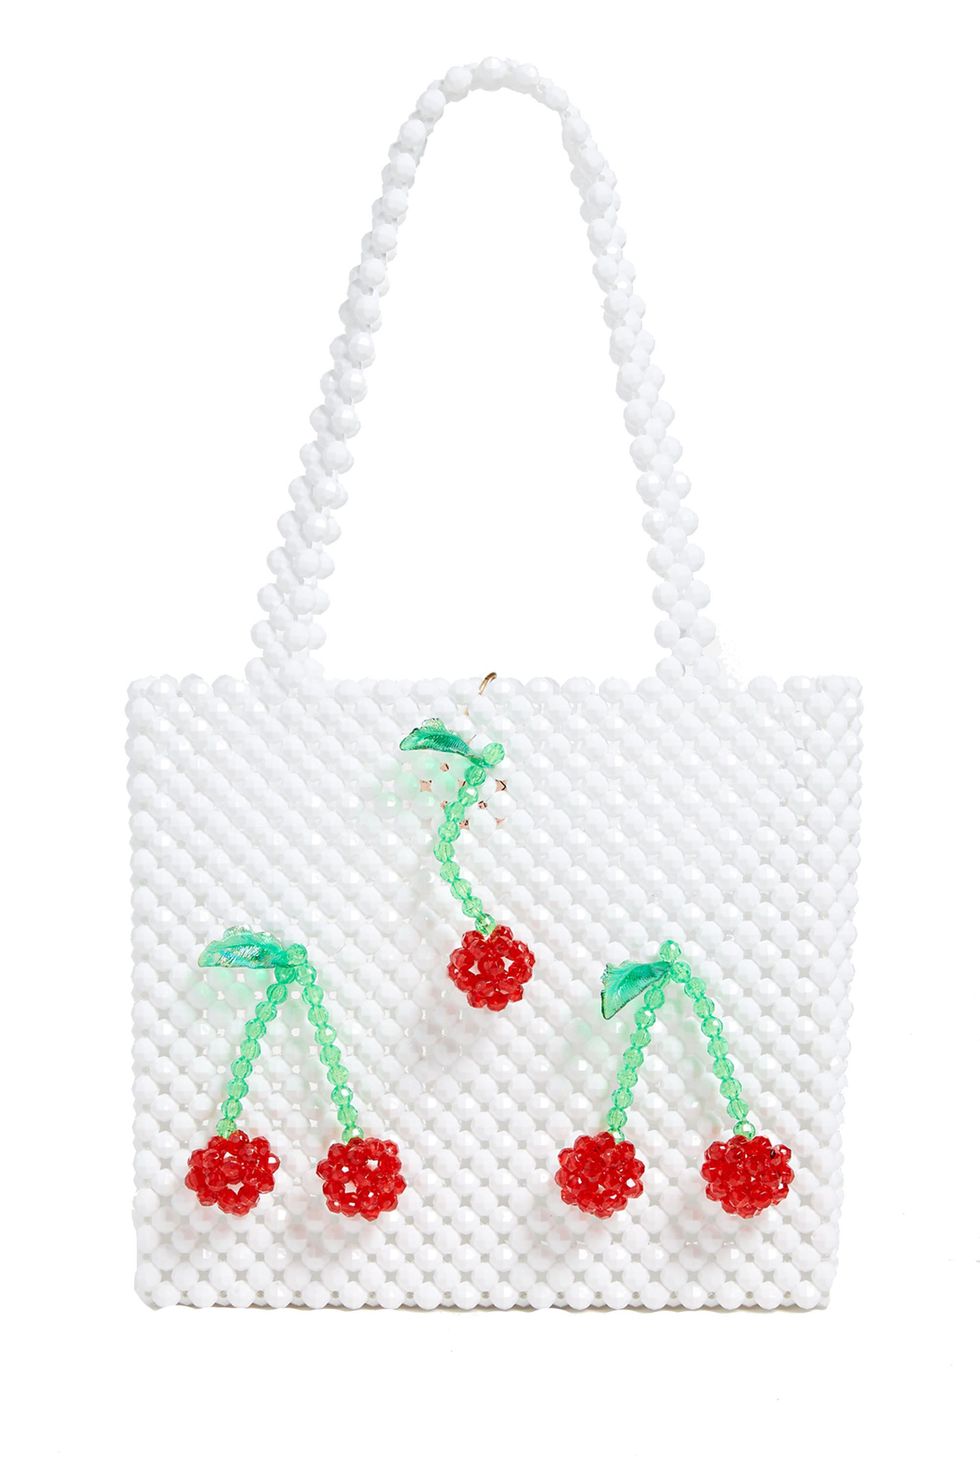 Why The Beaded Bag Is The Trend Of Summer 2018